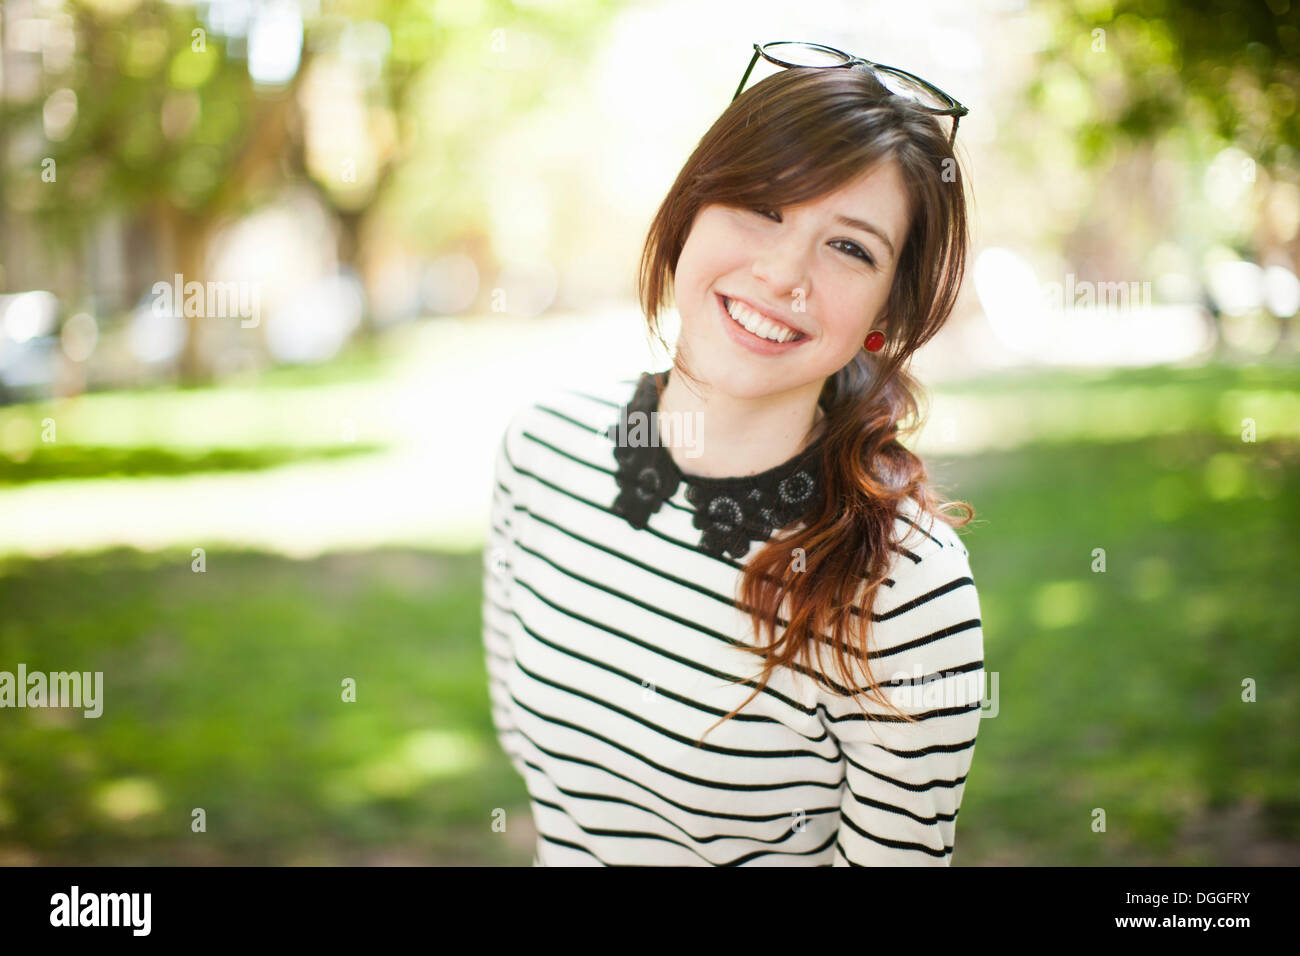 Portrait of young woman in park Stock Photo